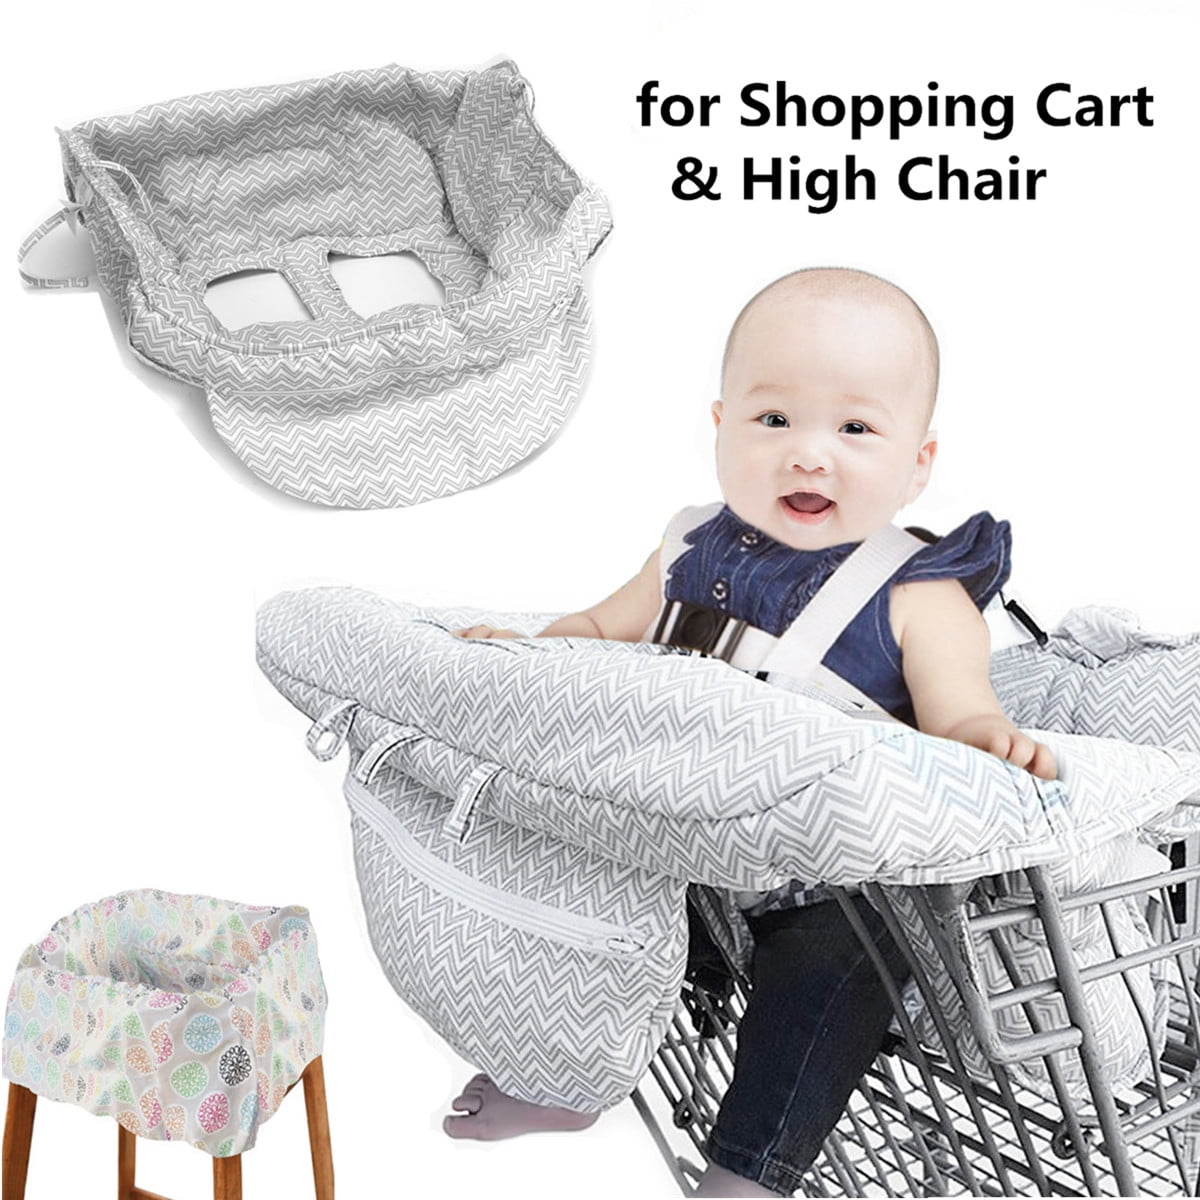 Infant Dining Chair Seat Cushion Maxmartt Portable Shopping Cart Chair Package Cover Trolley Soft Pad Baby Seat Cover 